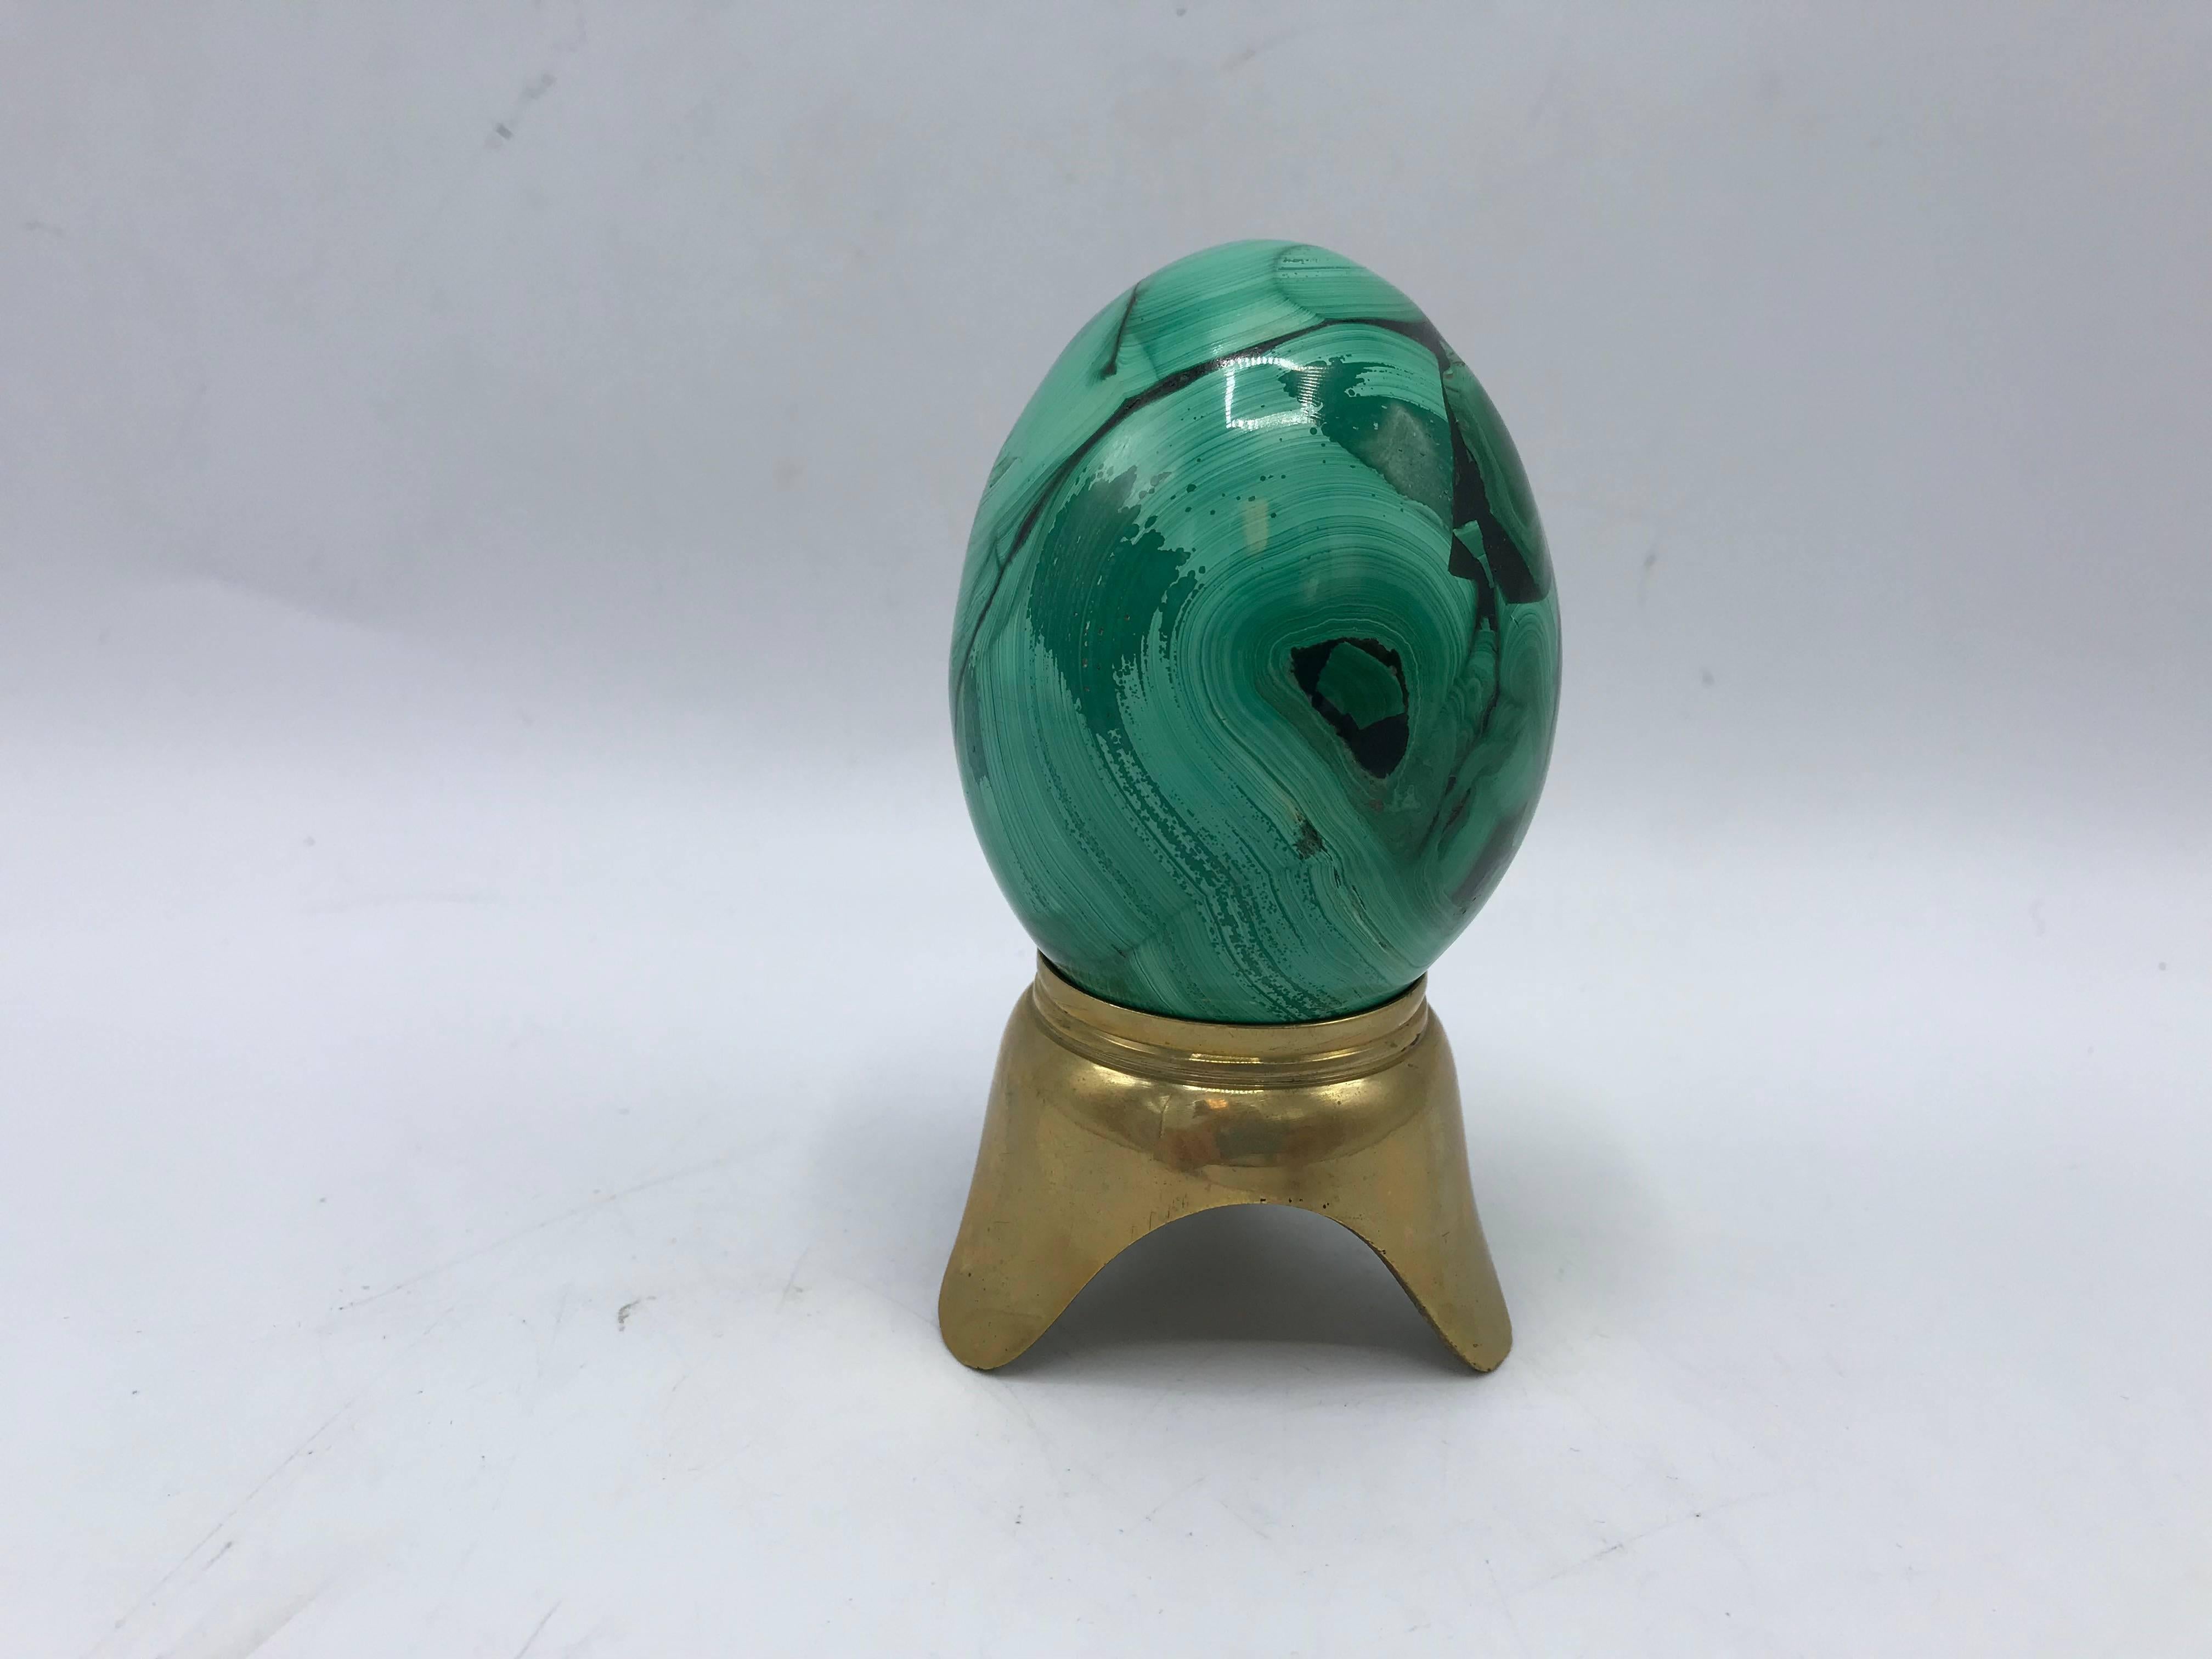 Listed is a stunning, mod and glam, 1960s Italian solid-malachite egg sculpture on a solid-brass Stand. The piece is beautiful and heavy for its small size.